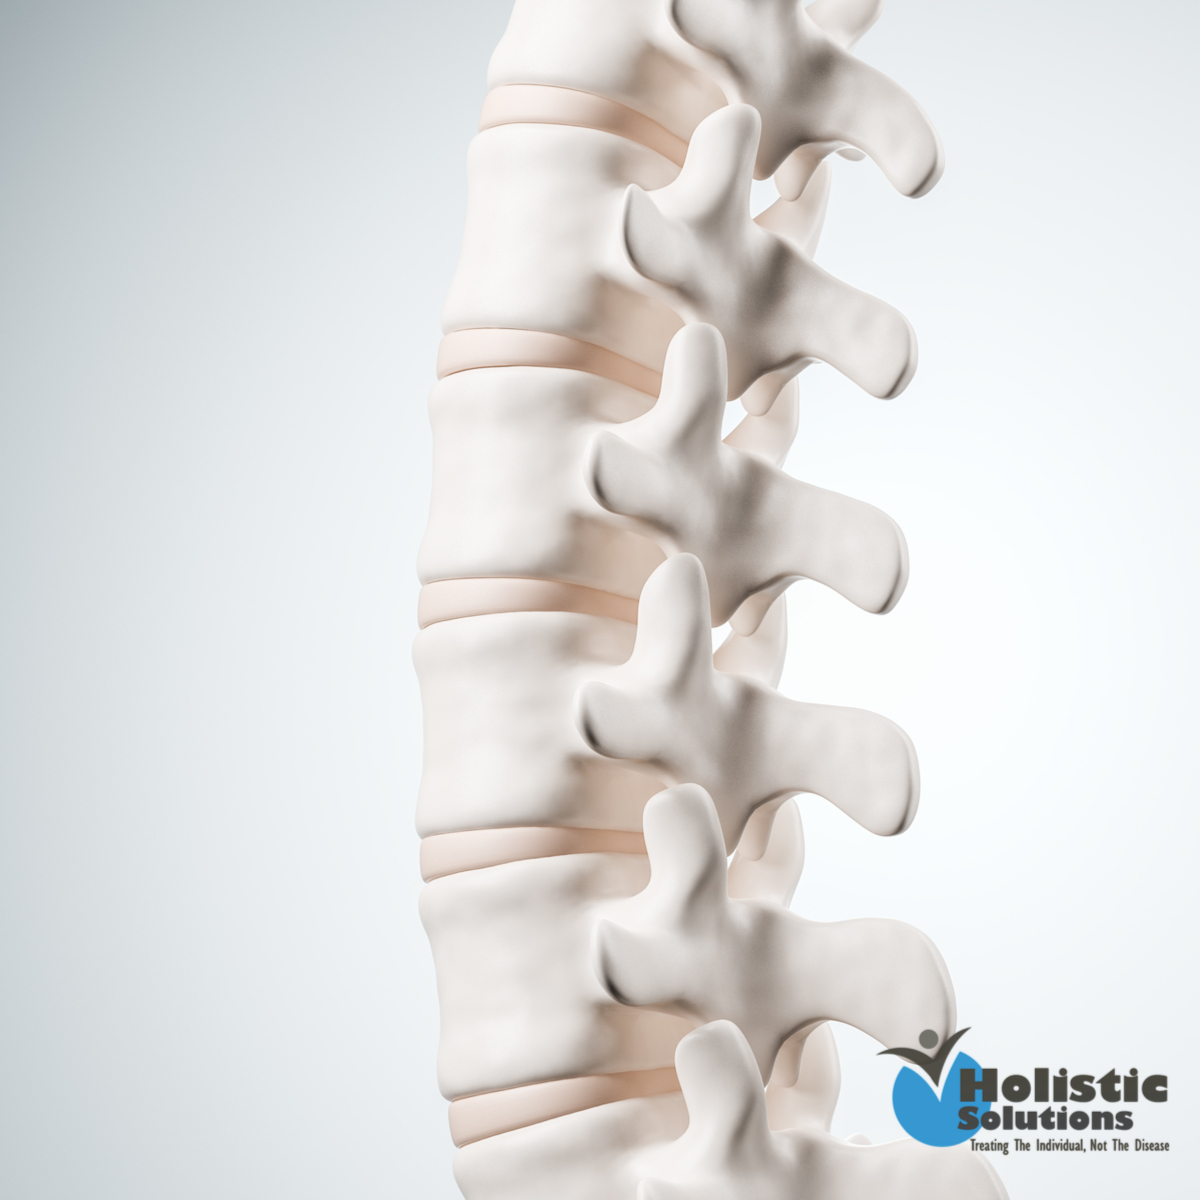 Trigger Healing With Prolotherapy for Spinal Stenosis Near Carlsbad